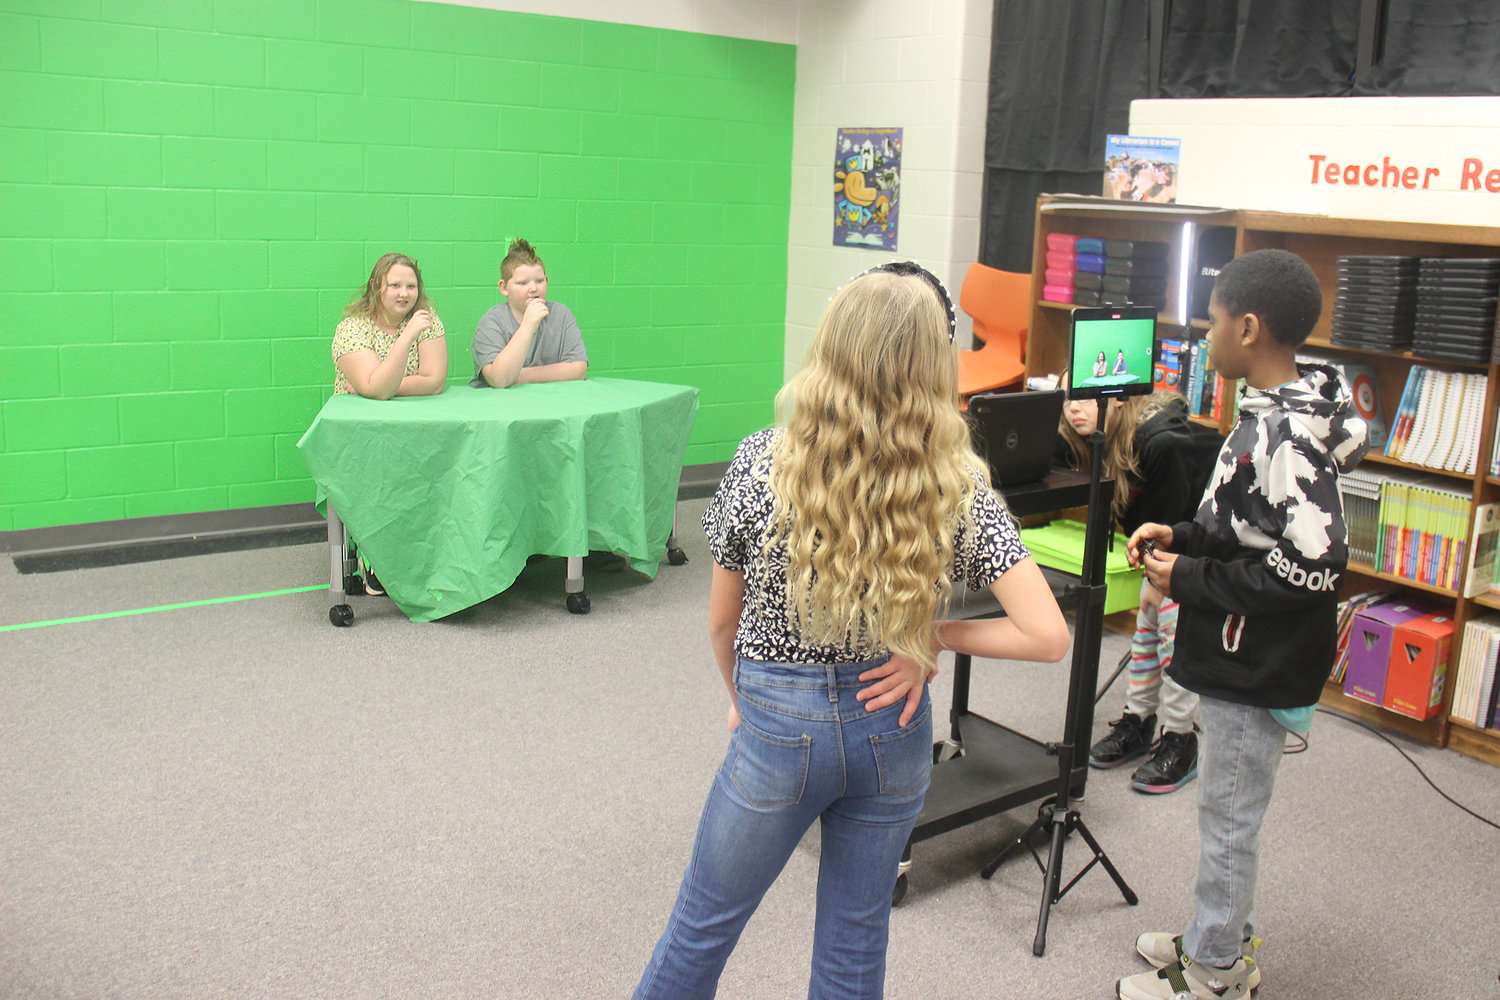 MAKING THE MAGIC HAPPEN — A group of fifth grade students fulfill the roles of anchors, videographers and production assistants for a daily news video at Rebecca Boone Elementary. Students can learn about presentation, writing, and video editing by taking part.